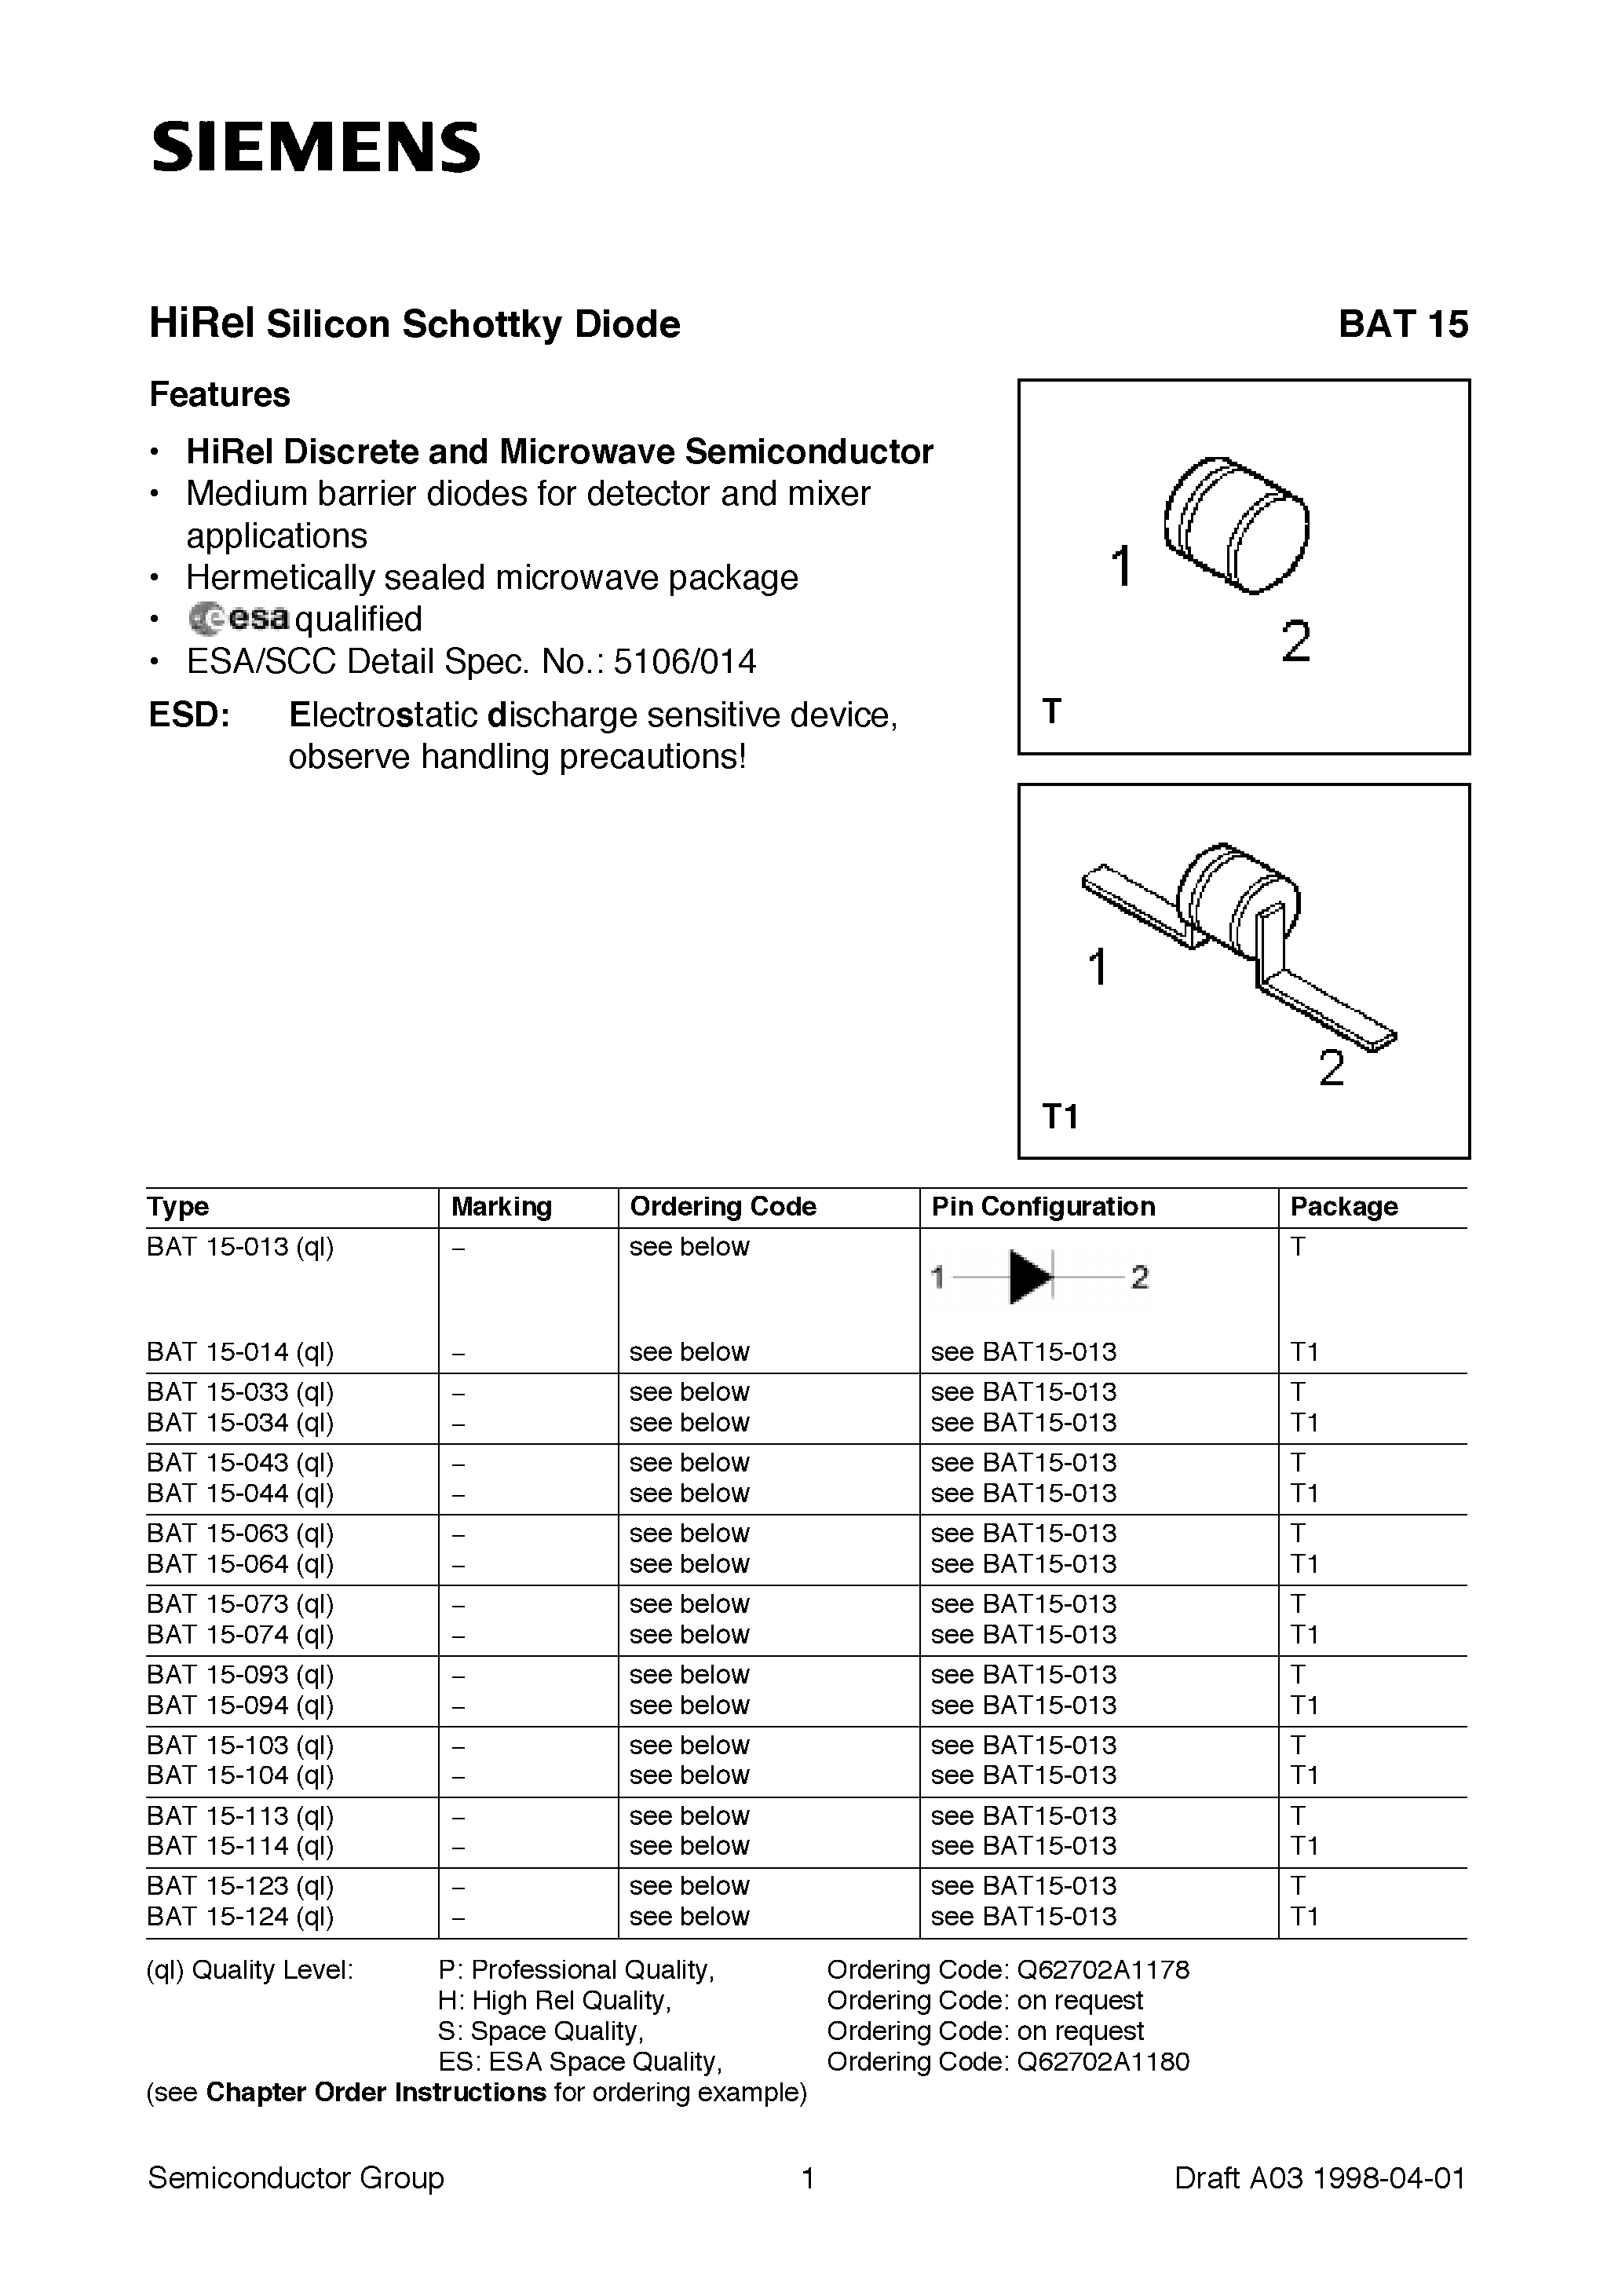 Datasheet BAT15-123 - HiRel Silicon Schottky Diode (HiRel Discrete and Microwave Semiconductor Medium barrier diodes for detector and mixer applications) page 1